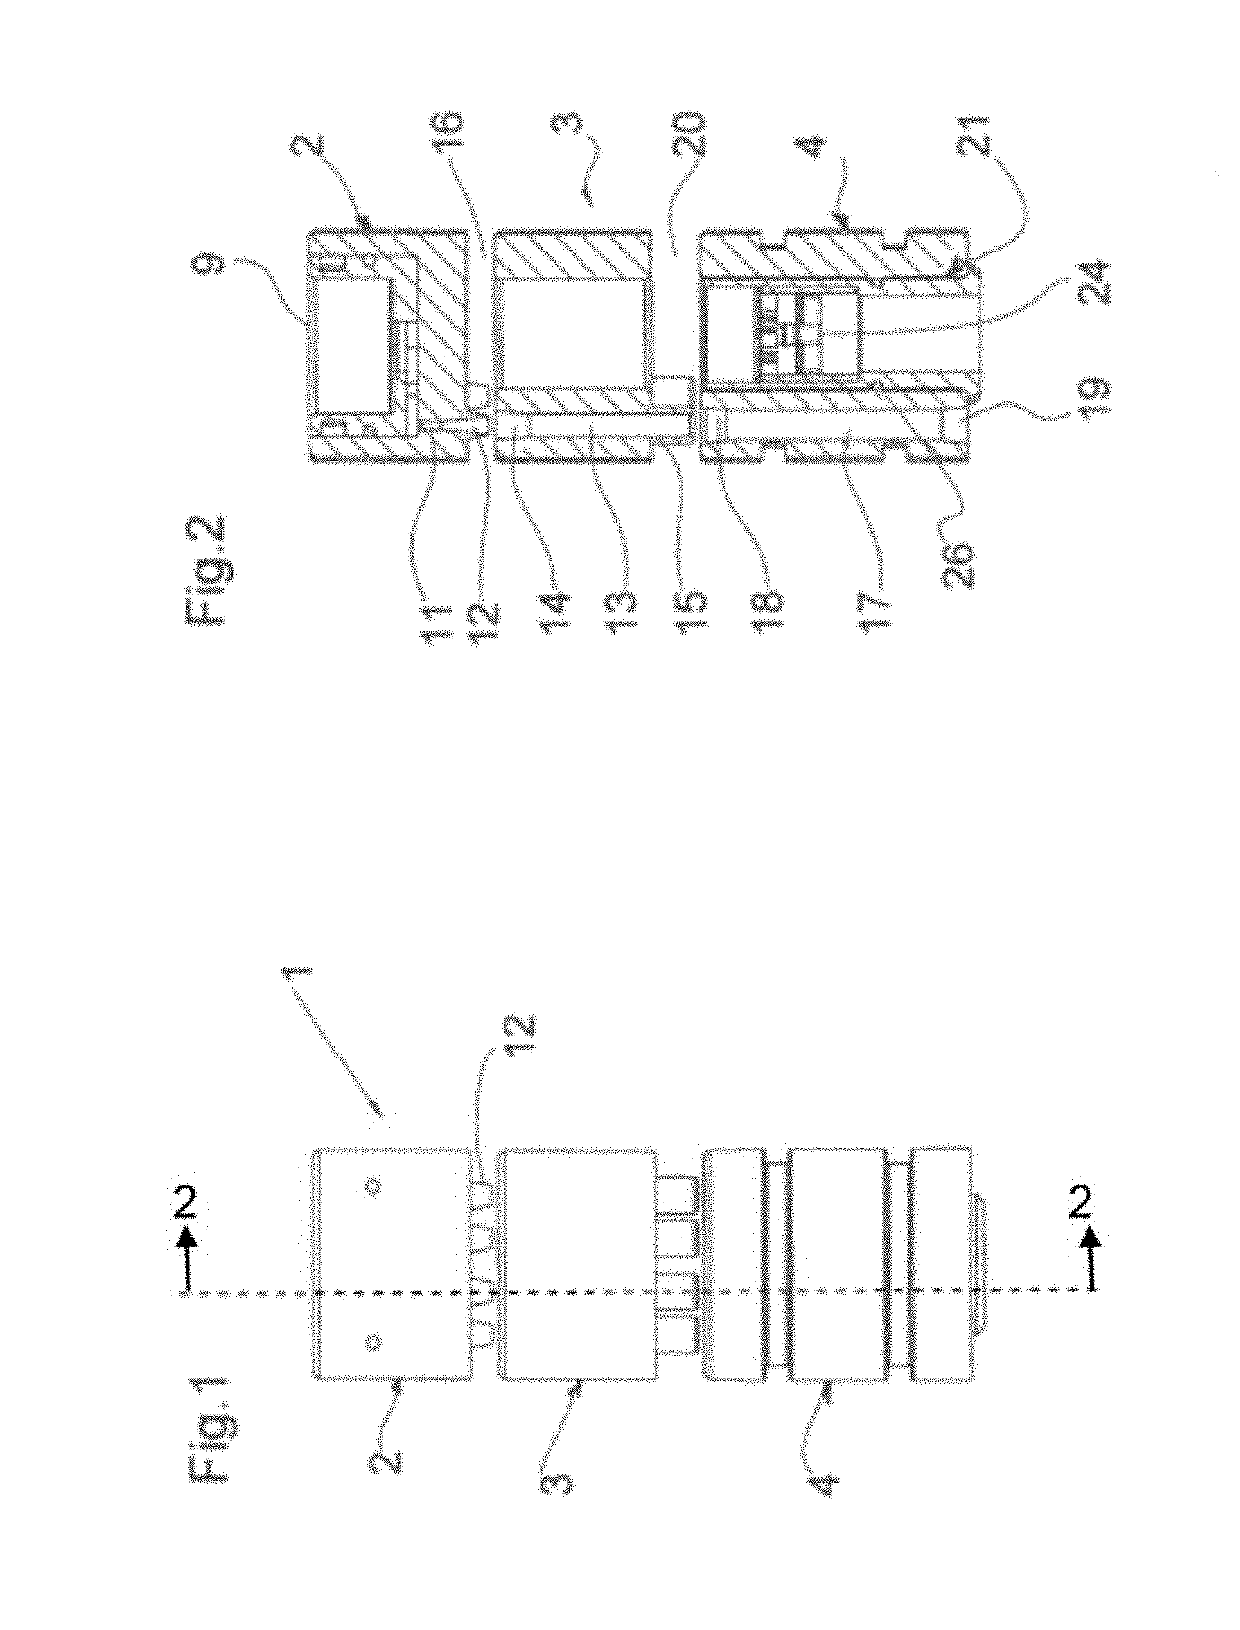 Multi-stage vacuum ejector